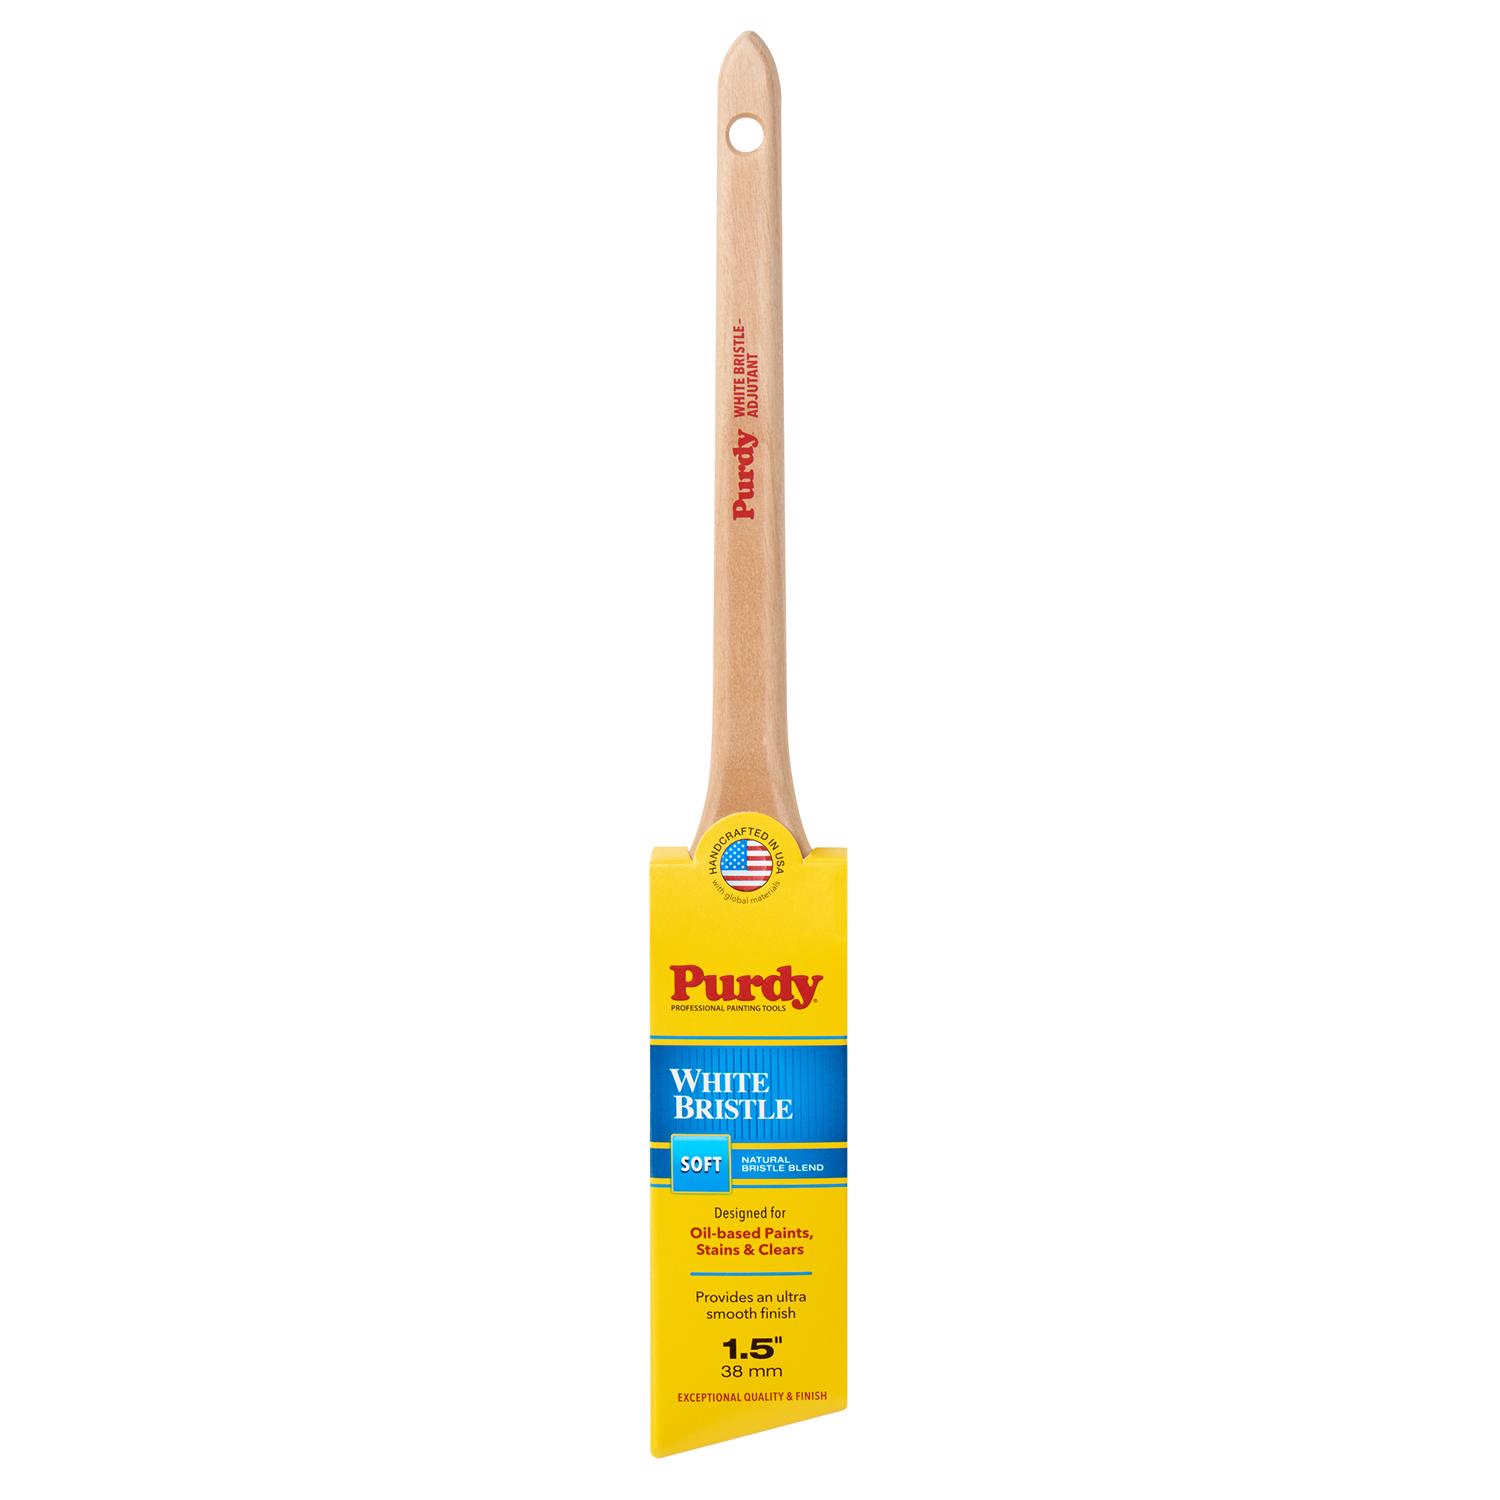 Photos - Putty Knife / Painting Tool Purdy White Bristle Adjutant 1-1/2 in. Soft Angle Trim Paint Brush 1450244